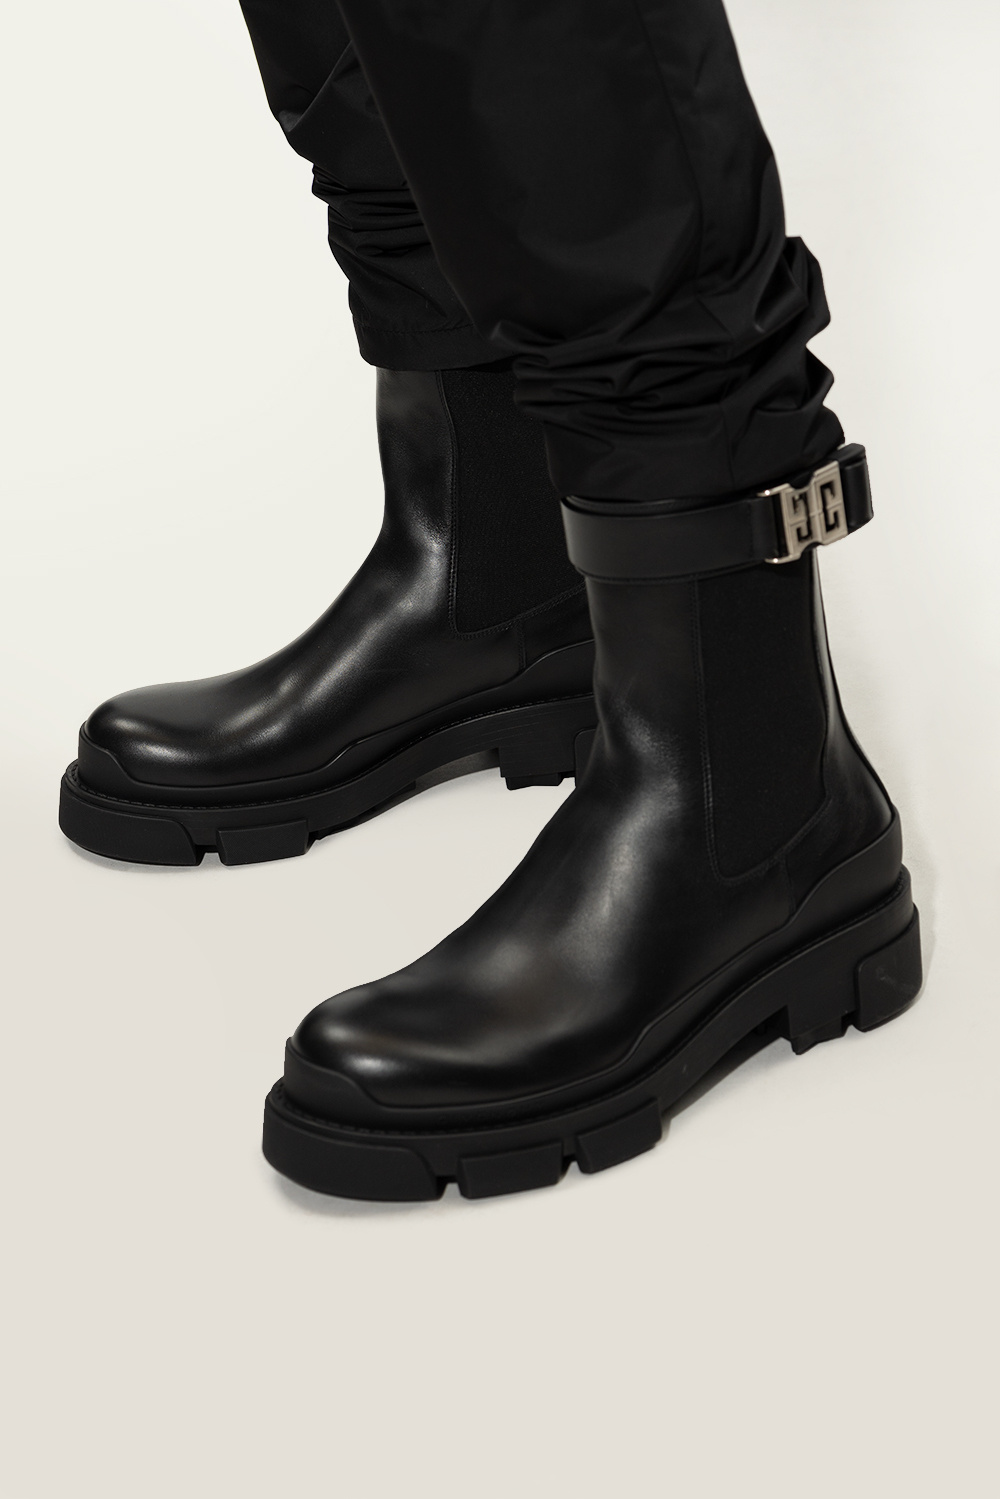 Givenchy ‘Terra’ leather ankle boots